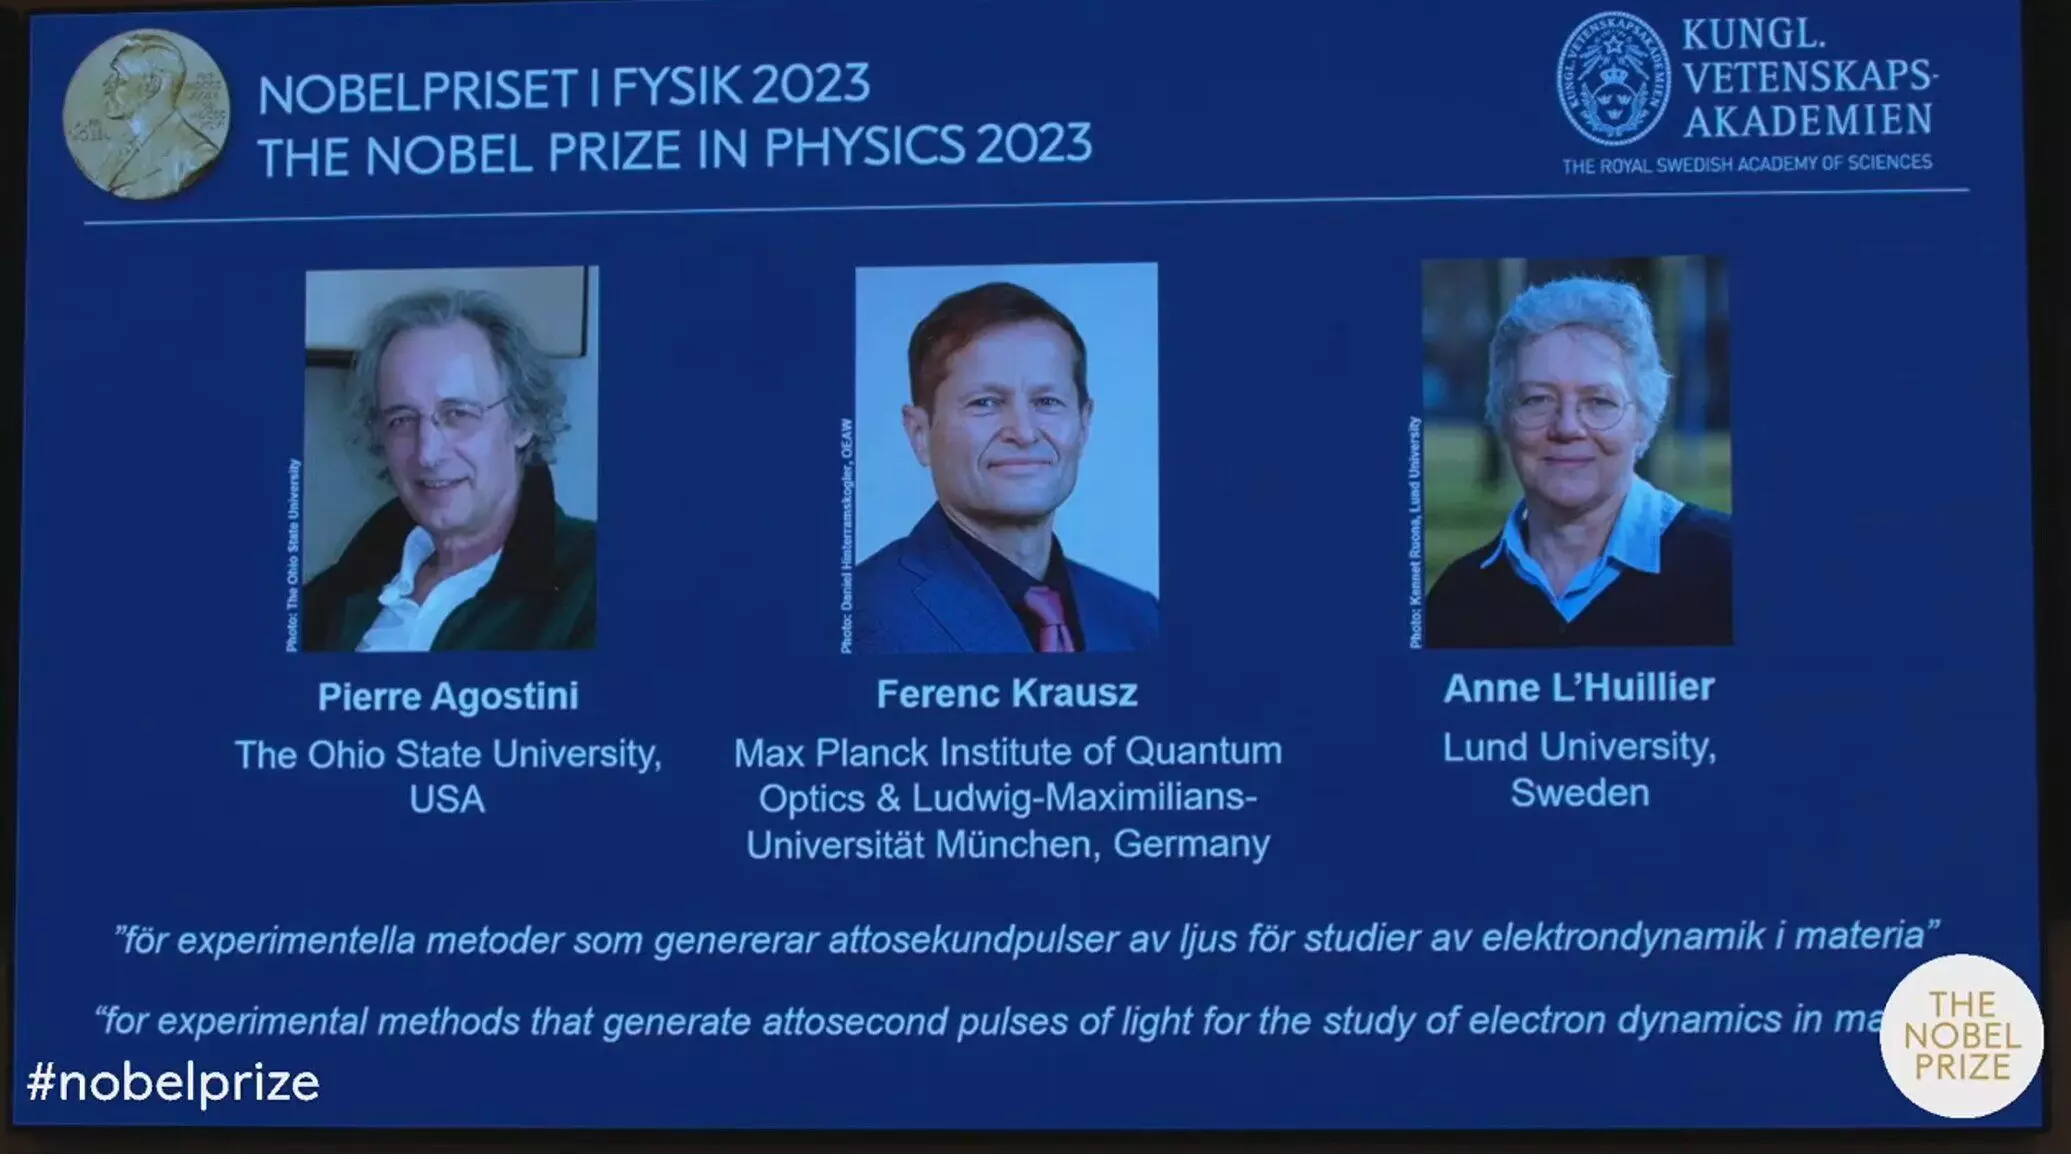 Nobel Prize in Physics goes to Agostini, Krausz, and LHuillier for contributions to the study of electron dynamics in matter